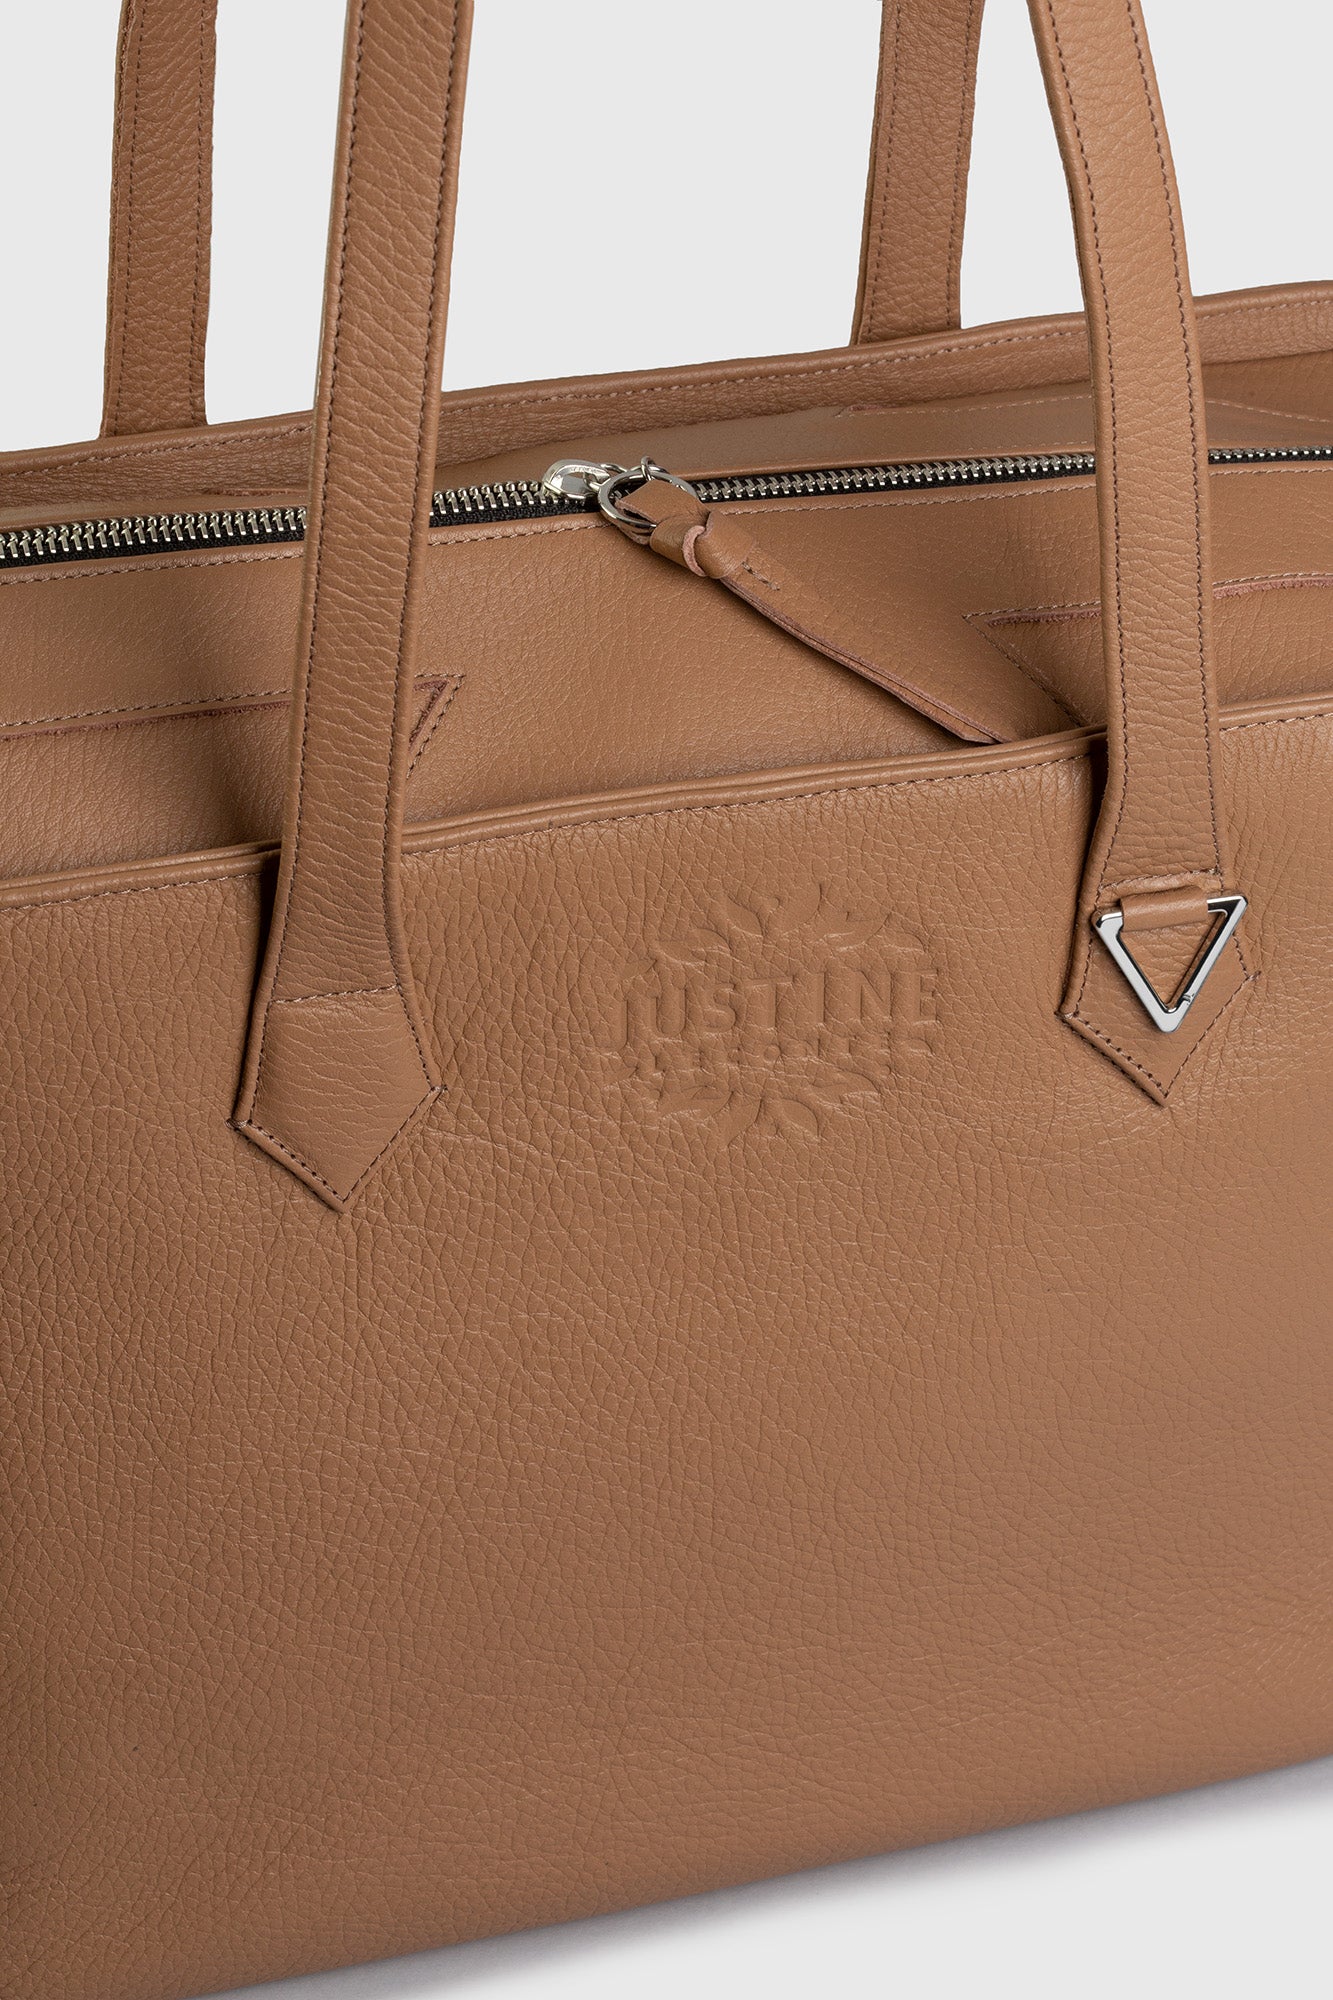 JL tote bag leather - Warm sand